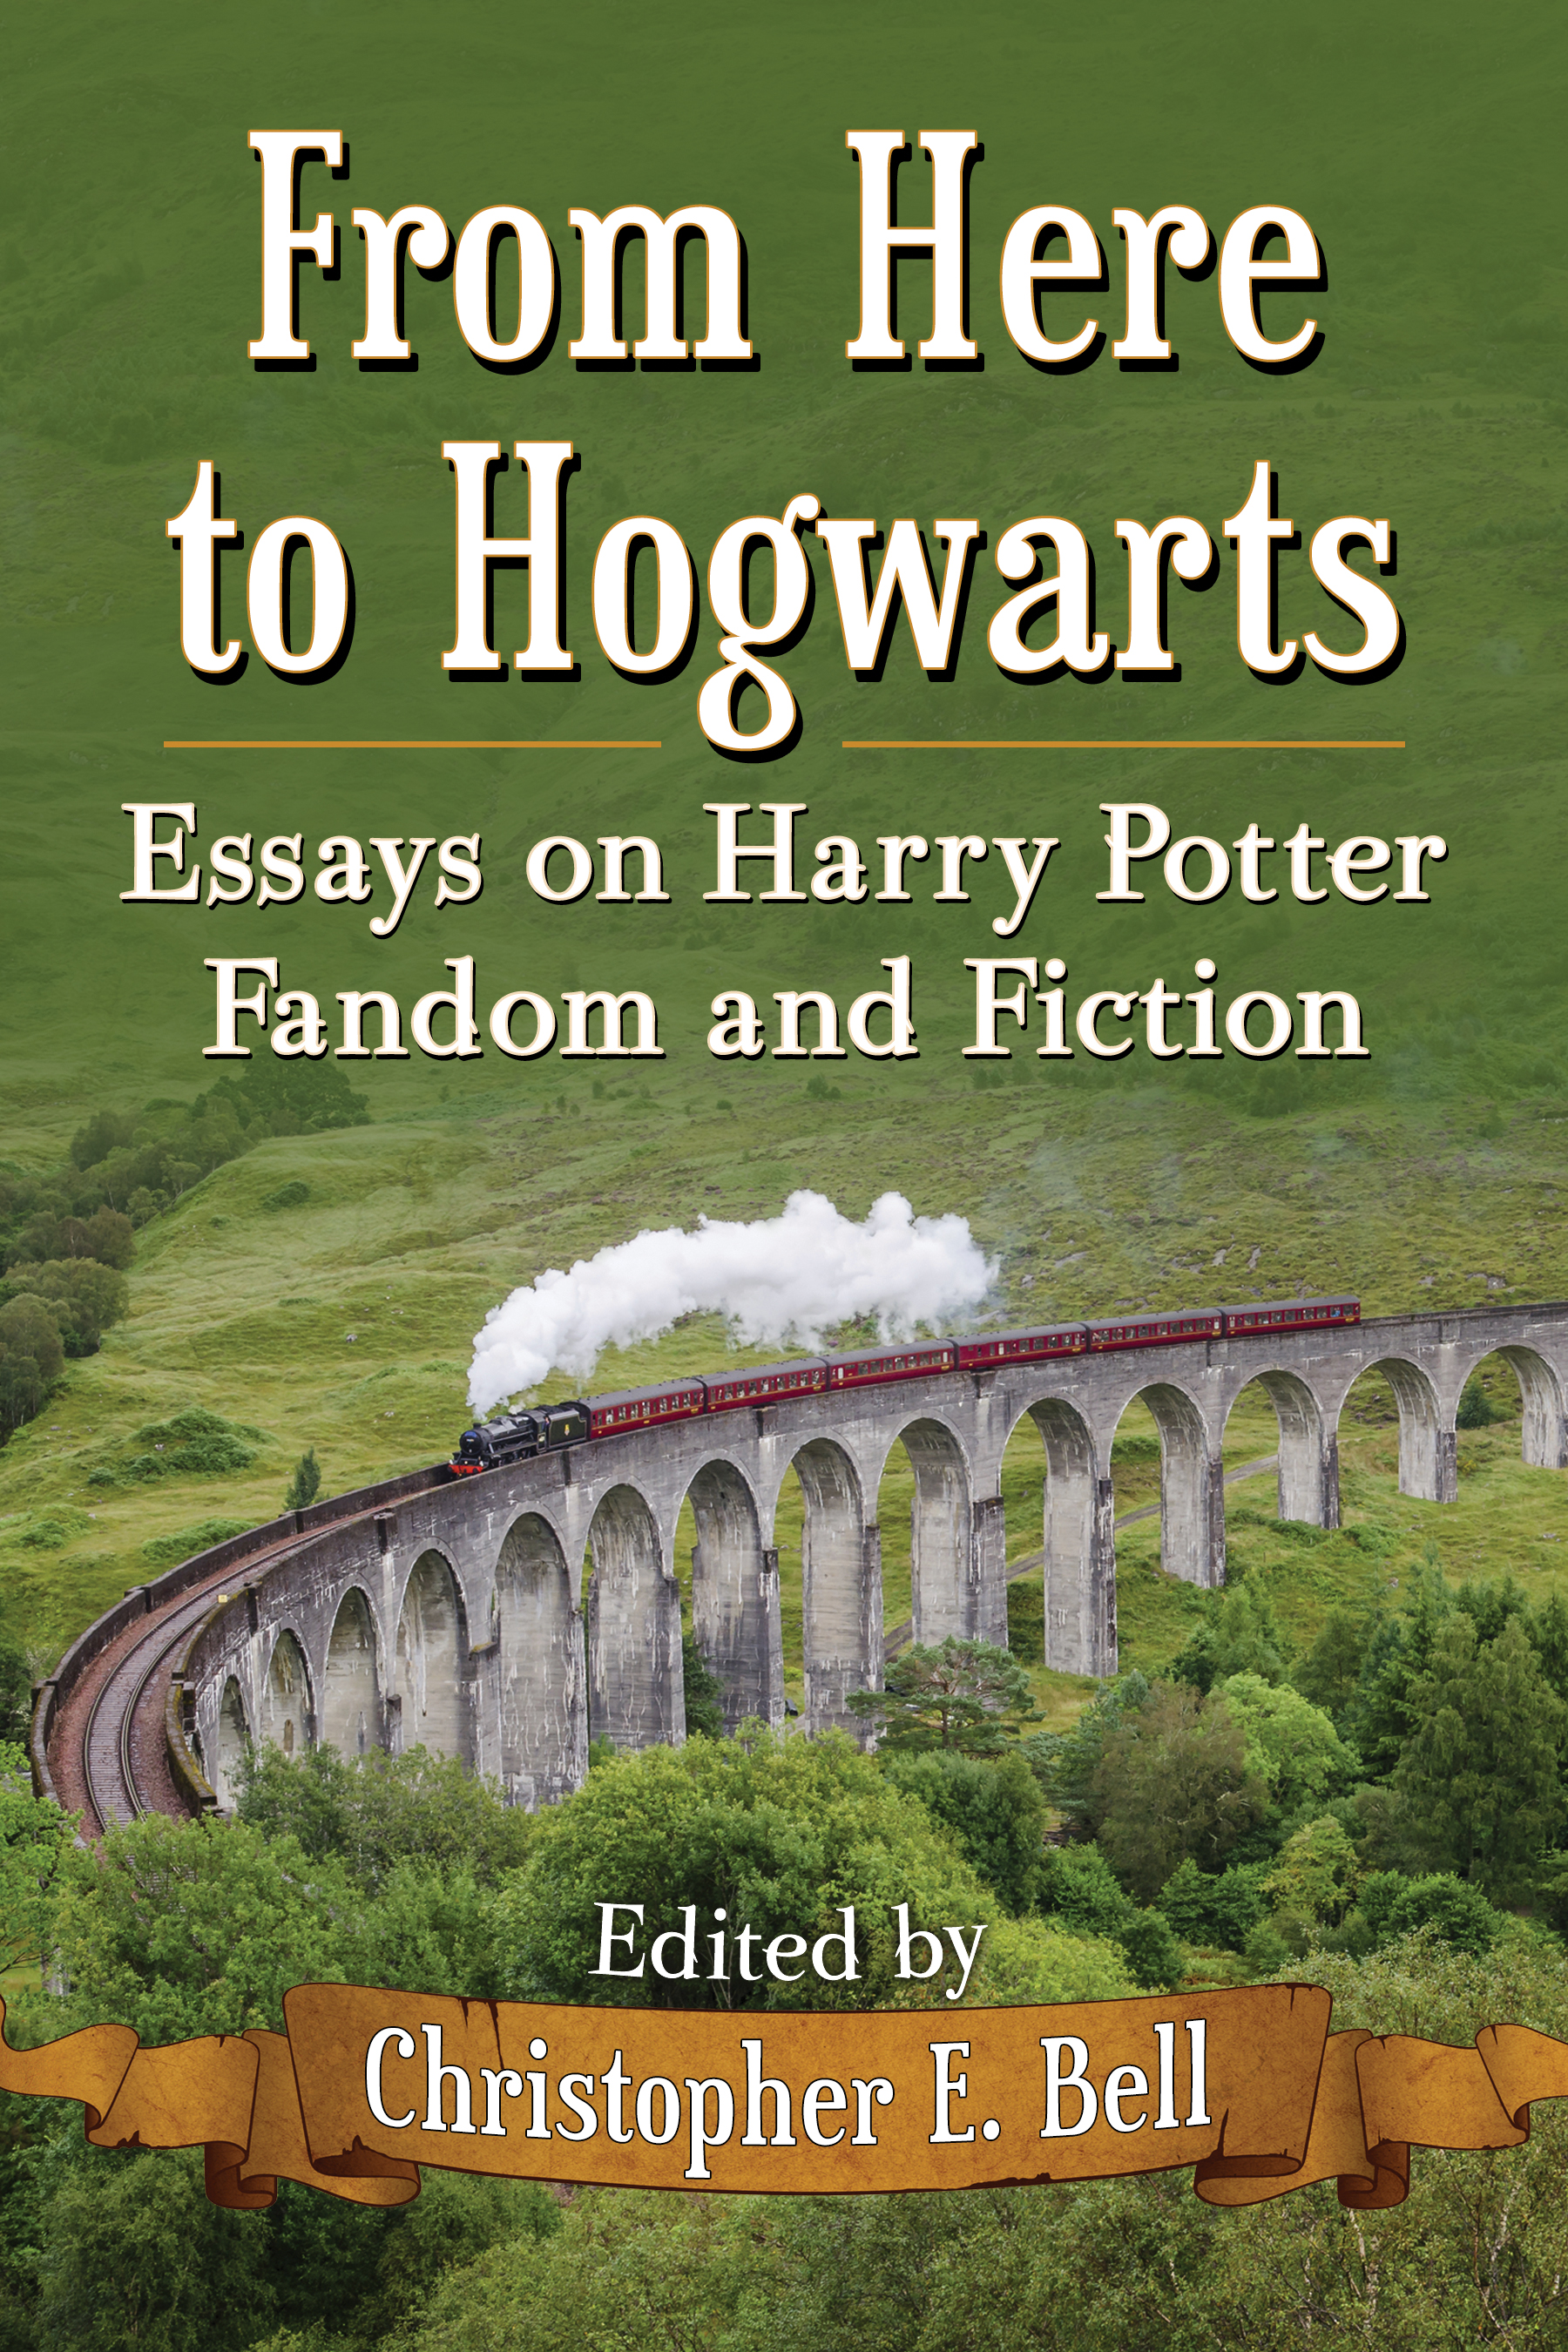 From Here to Hogwarts - image 1